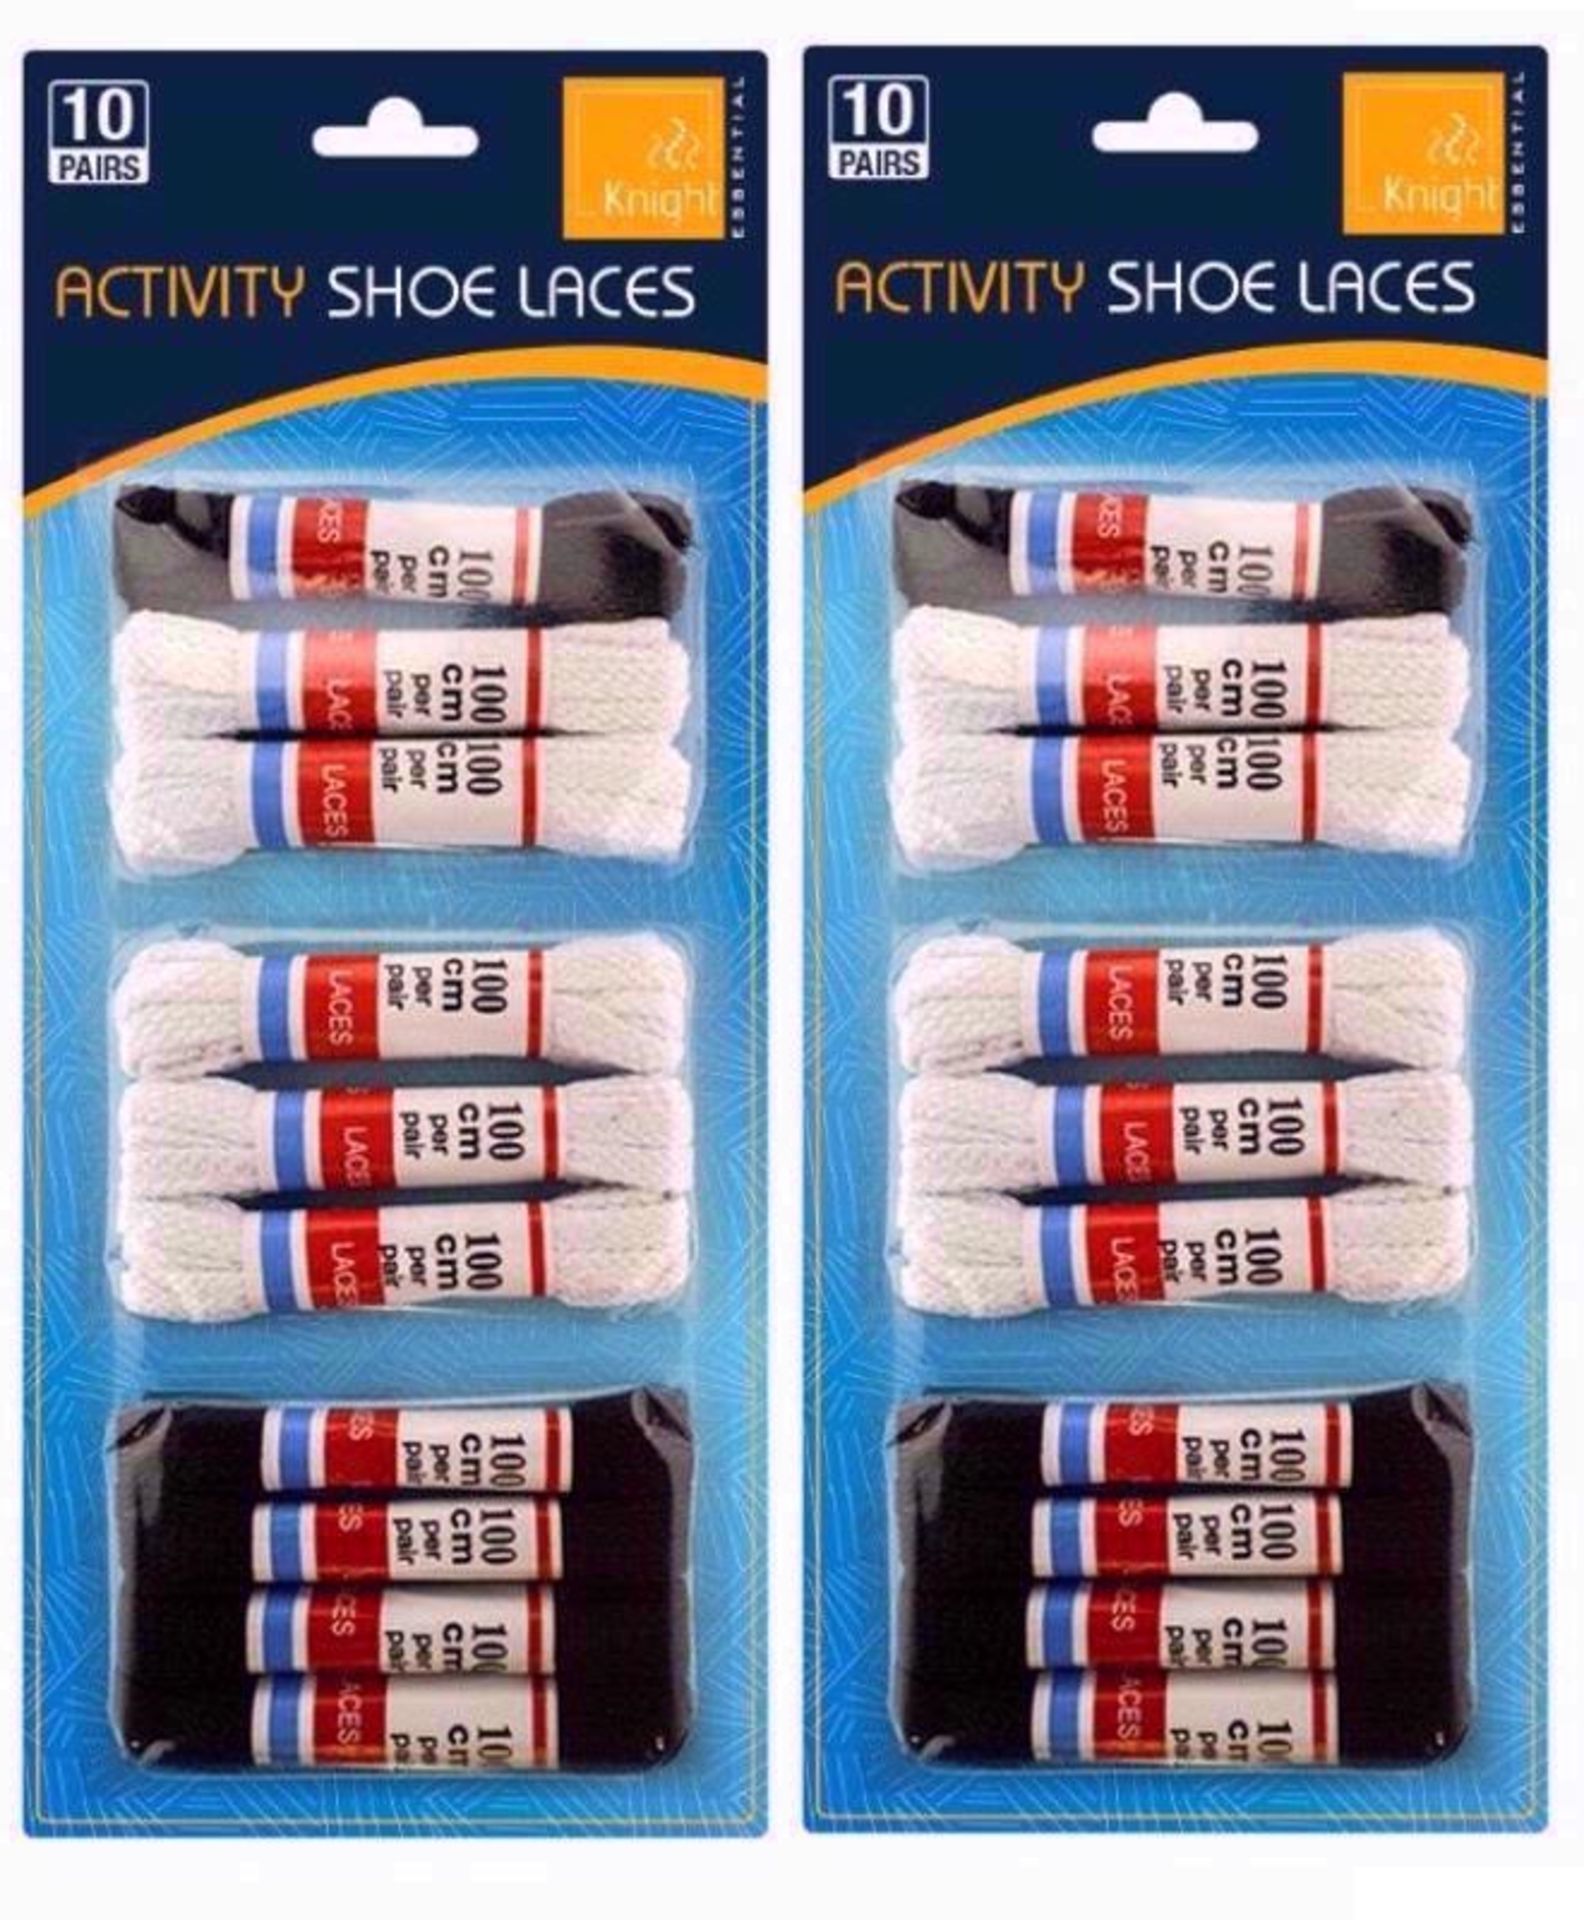 V Brand New 2 Packs Of 10 Pairs Of Activity Shoe Laces - Includes 6 Black and 6 White 100 Cm Pairs